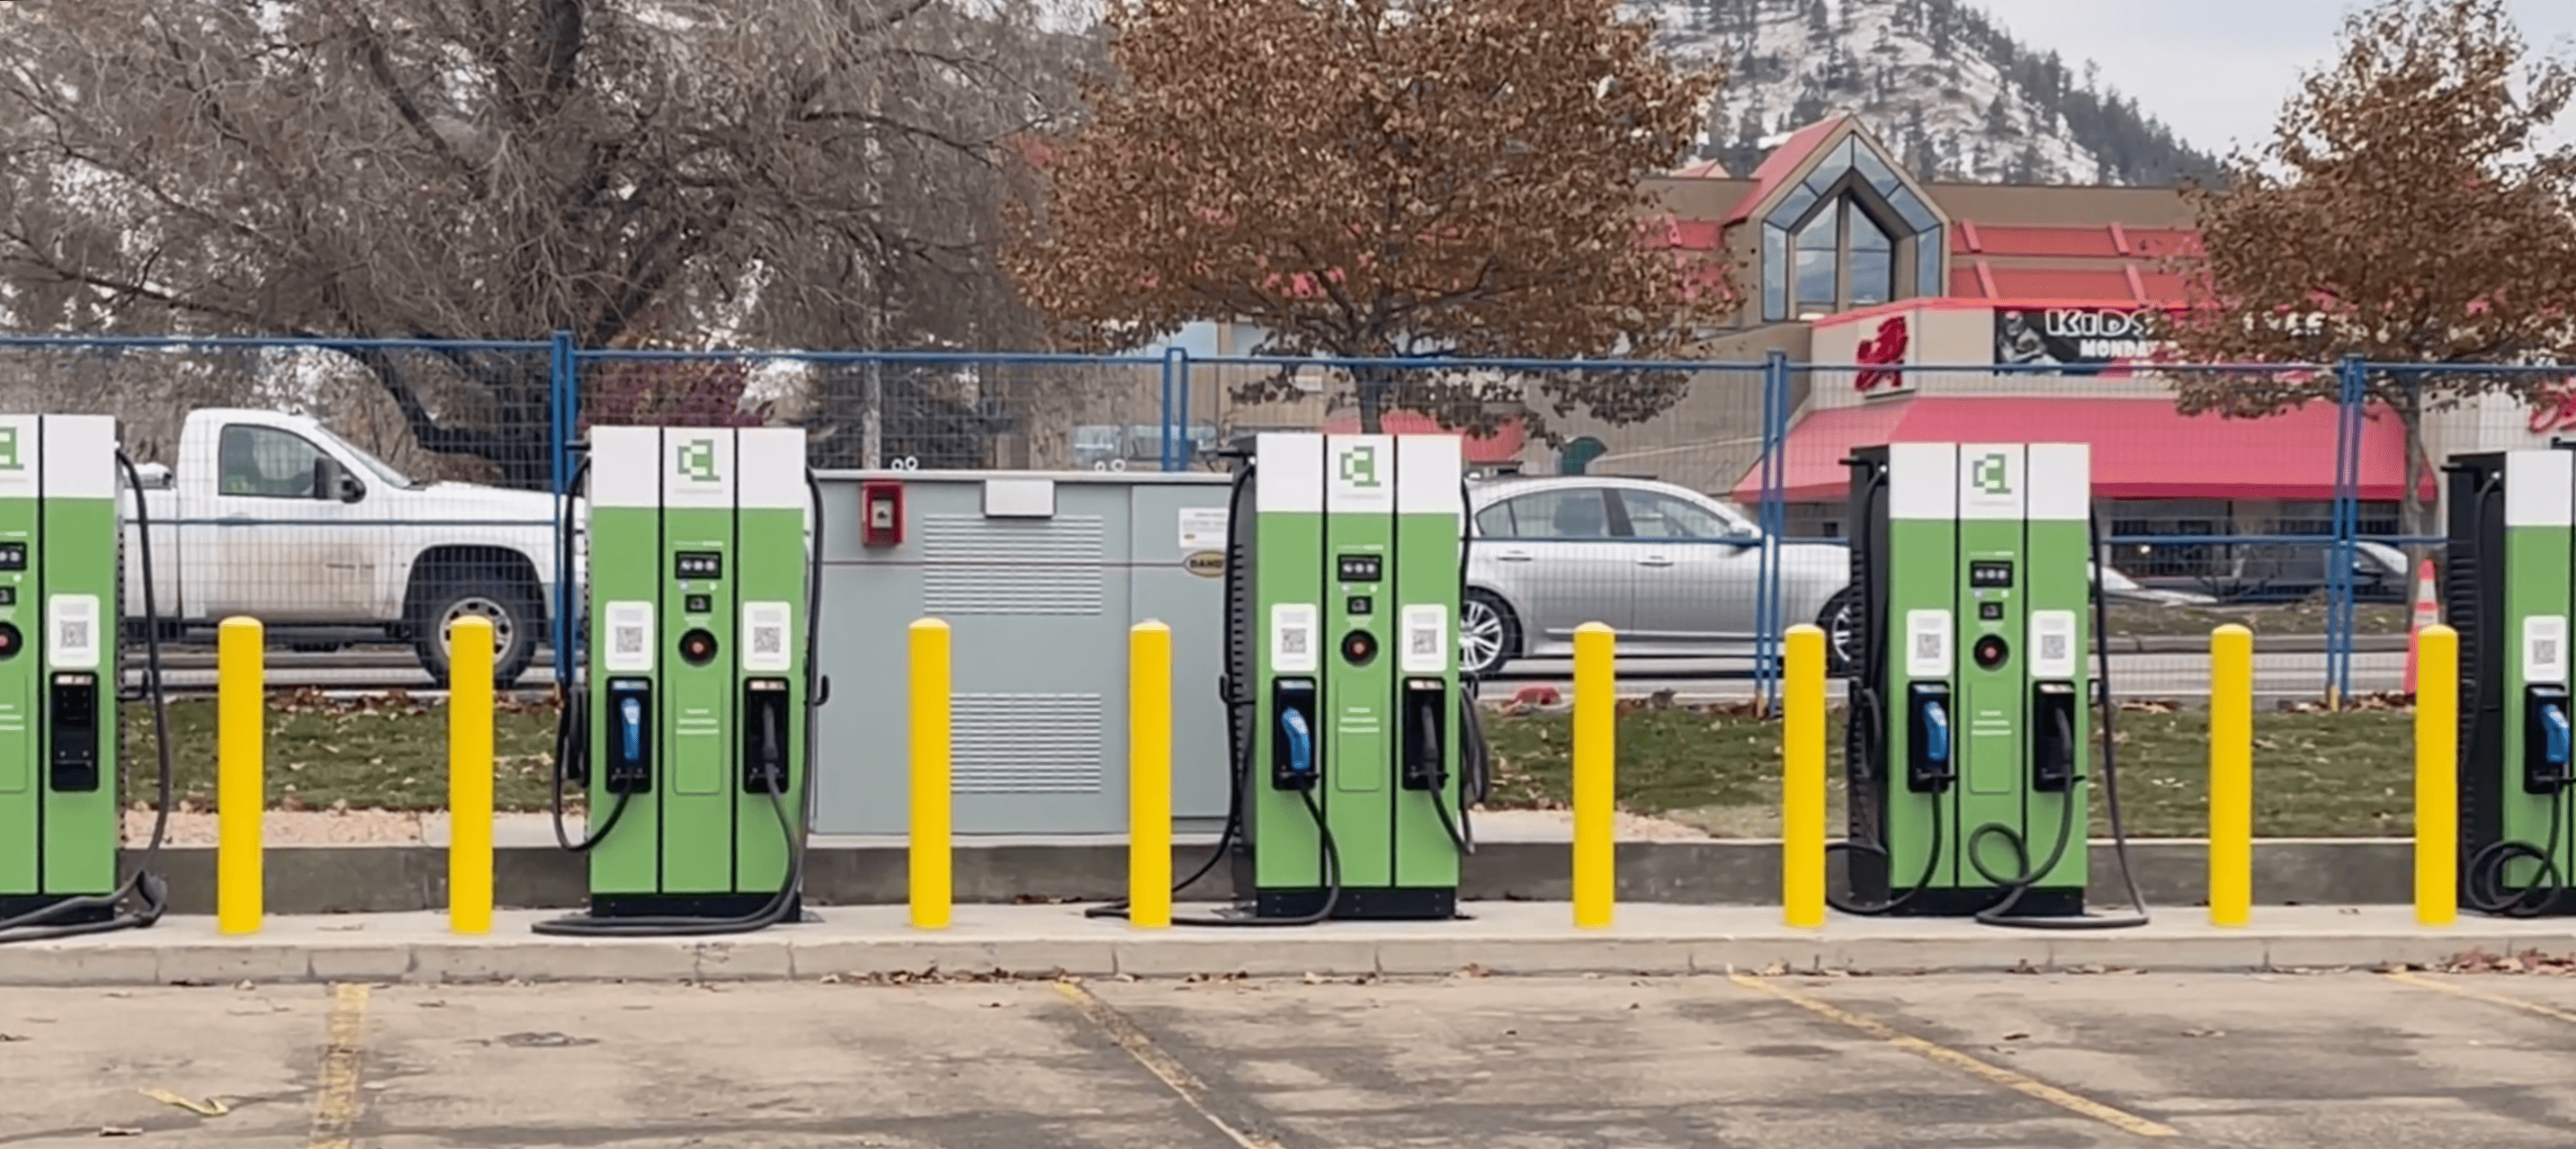 4 green DC fast charging stations with the CPO Chargerquest logo